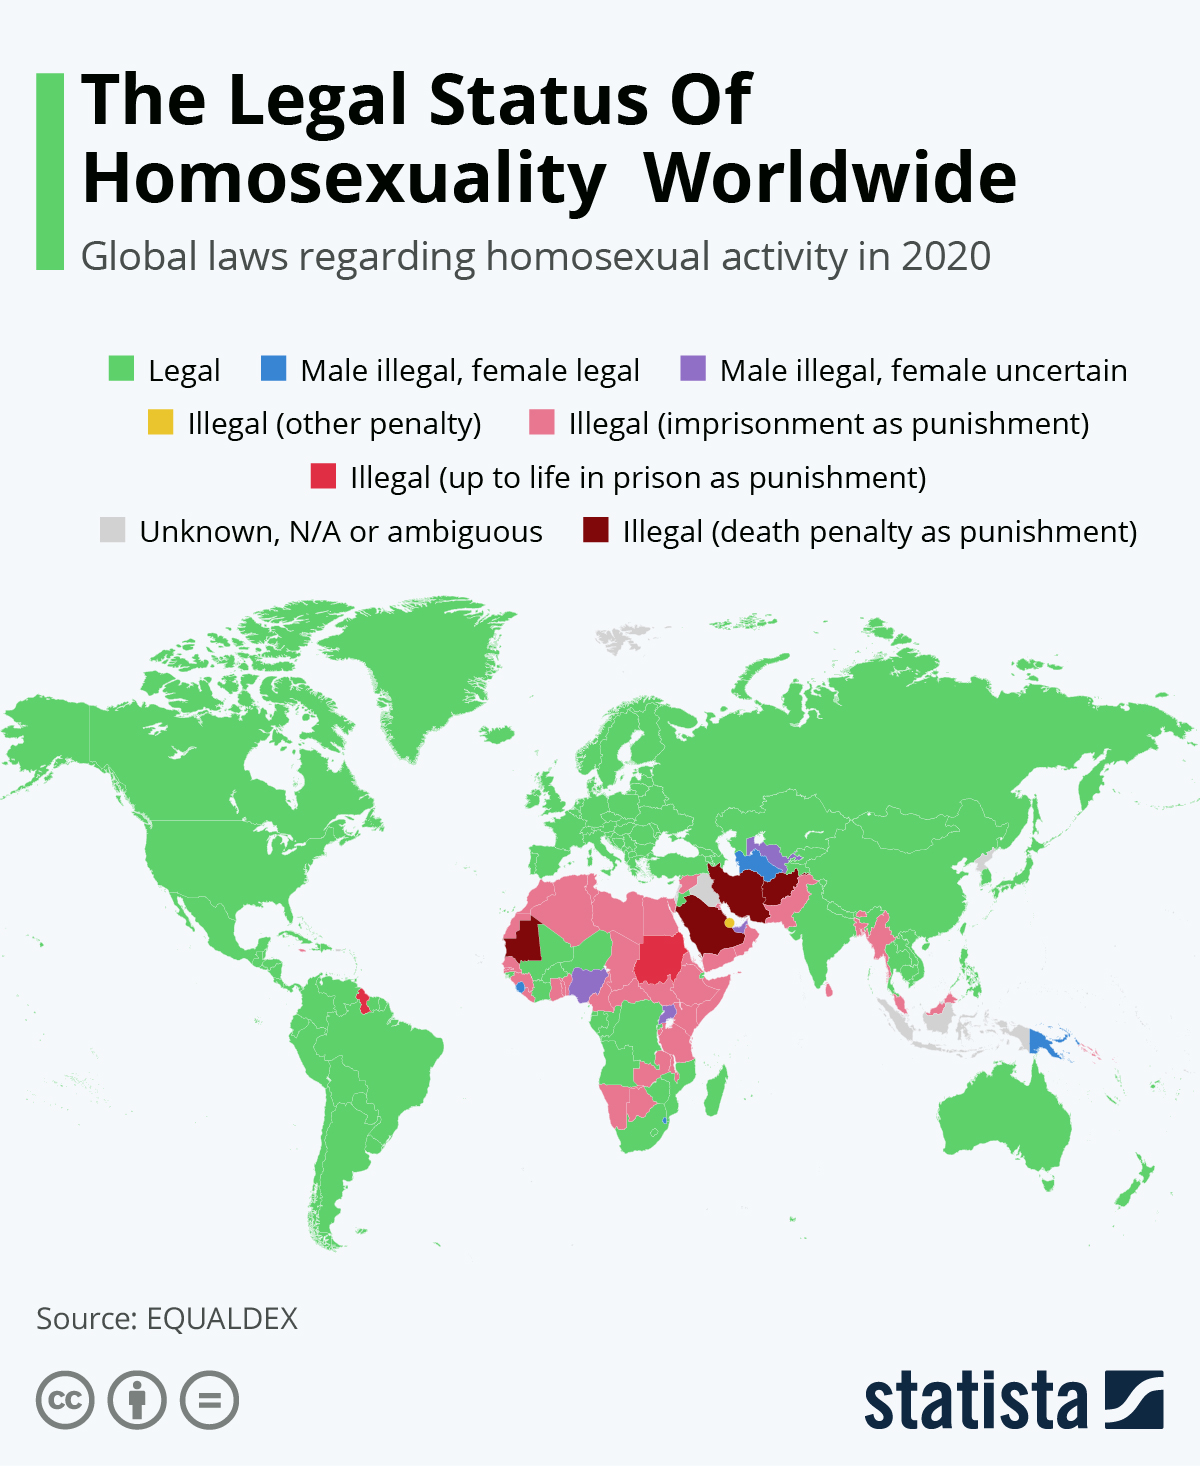 high resolution world map - The Legal Status Of Homosexuality Worldwide Global laws regarding homosexual activity in 2020 Legal Male illegal female legal Male illegal, female uncertain I Illegal other penalty illegal imprisonment as punishment | llegal up